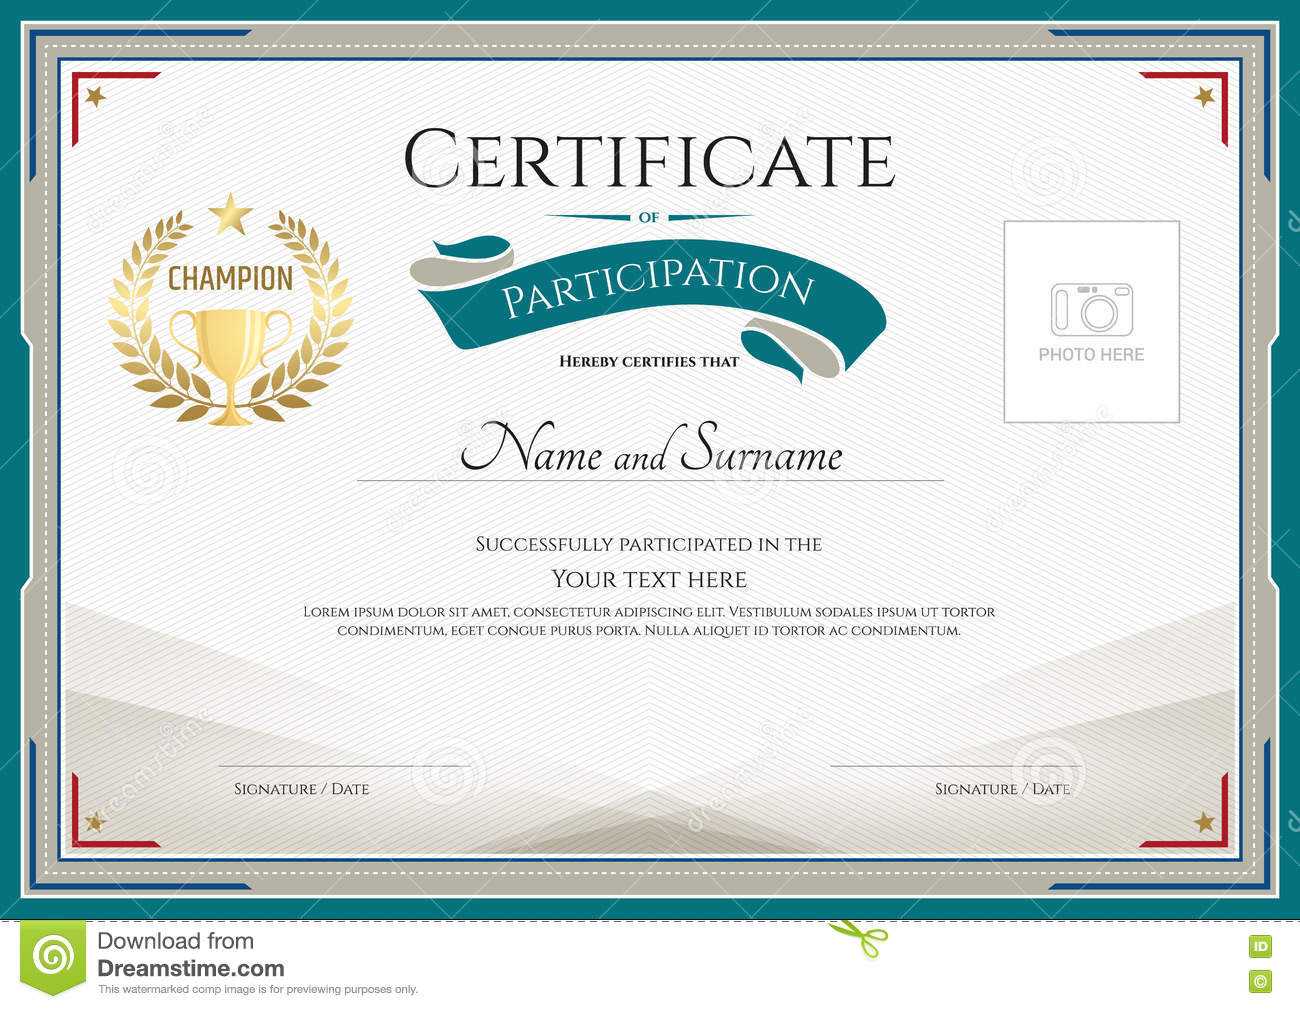 Certificate Of Participation Template With Green Broder In Certificate Of Participation Template Word